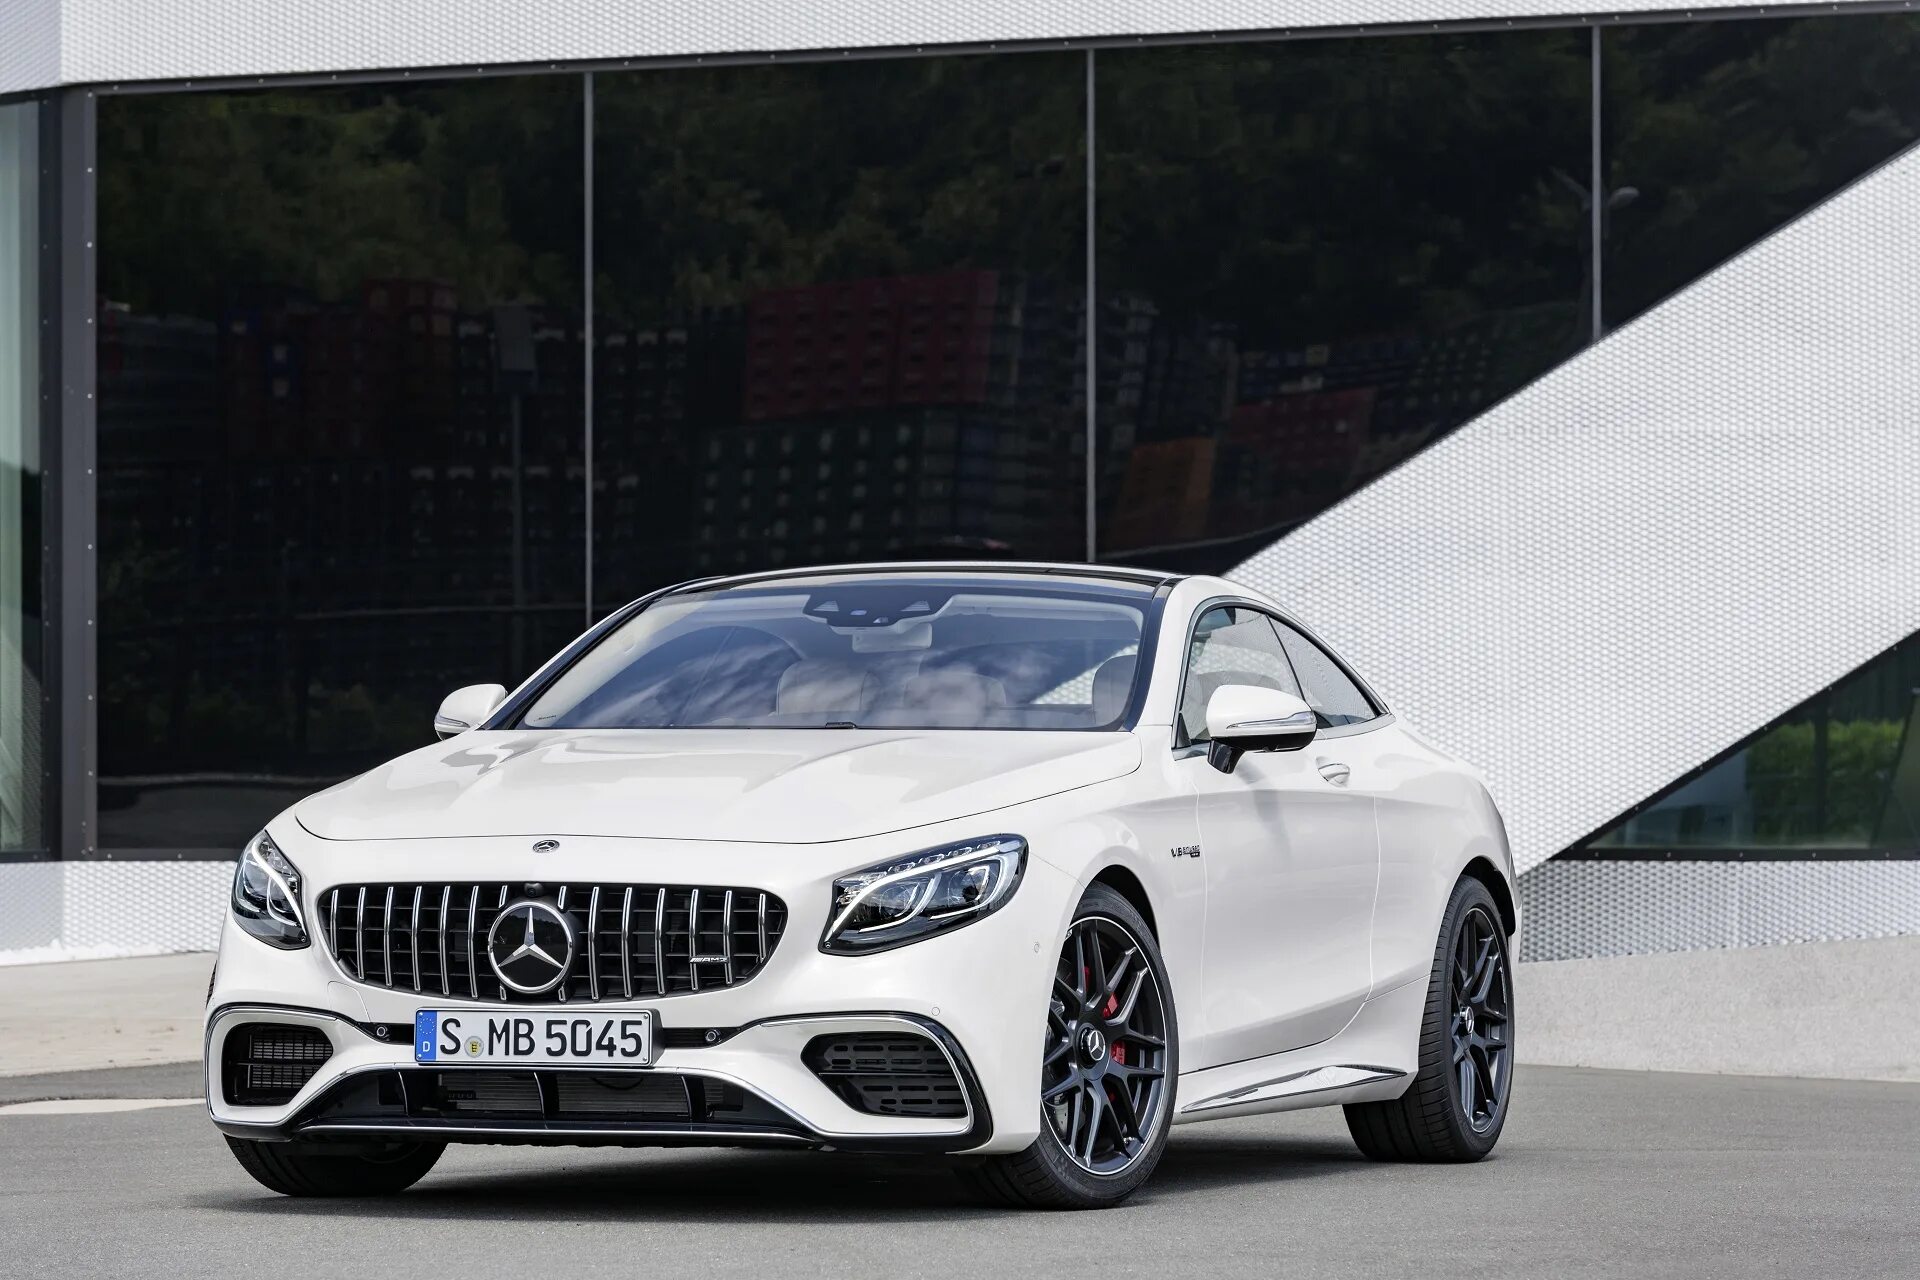 Мерсы 2018. Mercedes s63 AMG Coupe. Mercedes Benz s class Coupe 63 AMG. Mercedes s63 AMG Coupe 2020. Мерседес s63 AMG 2018.